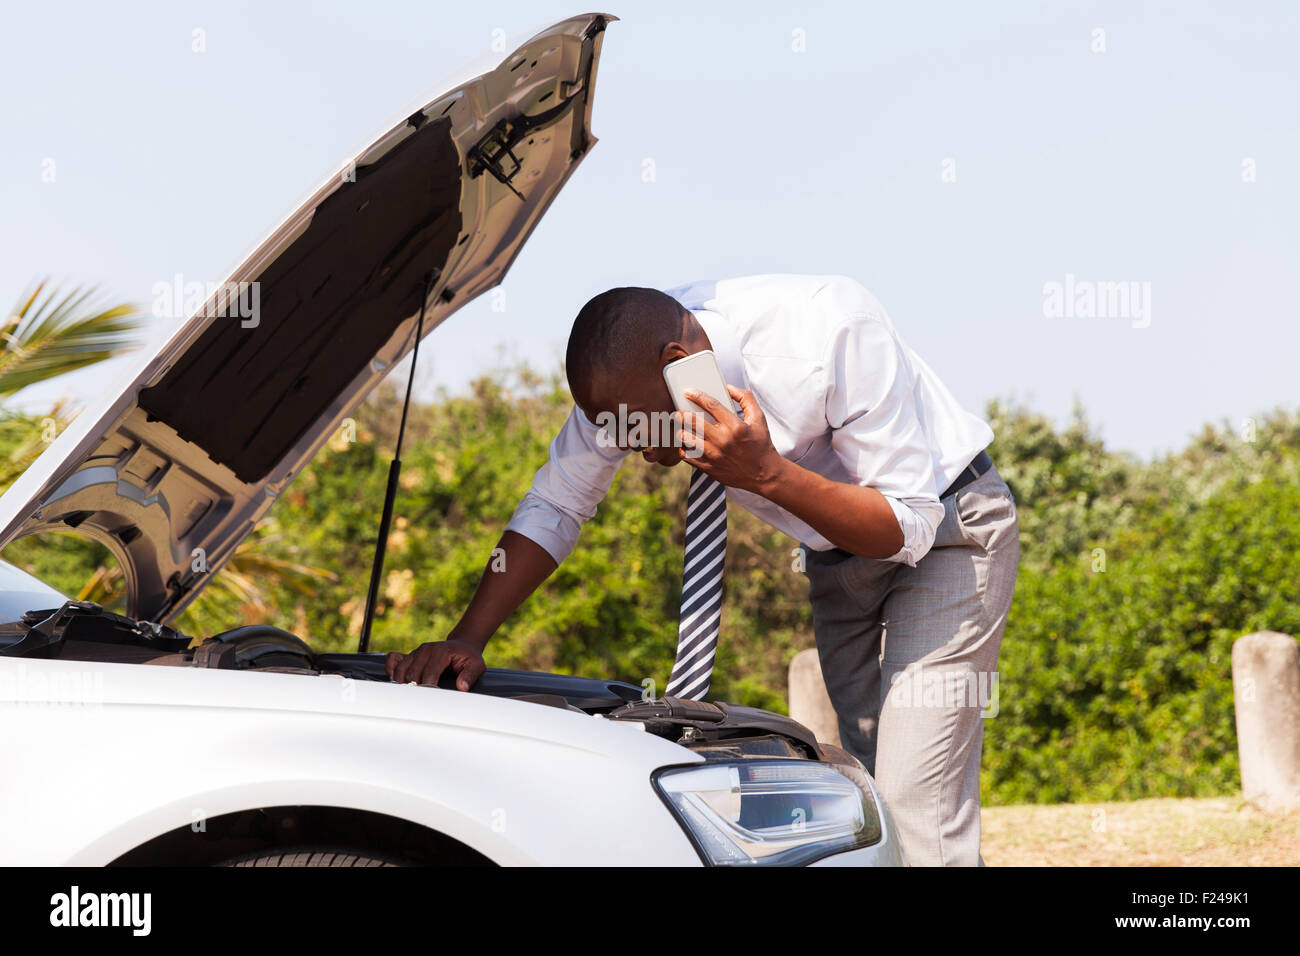 young man with broken down car with bonnet open calling for help Stock Photo